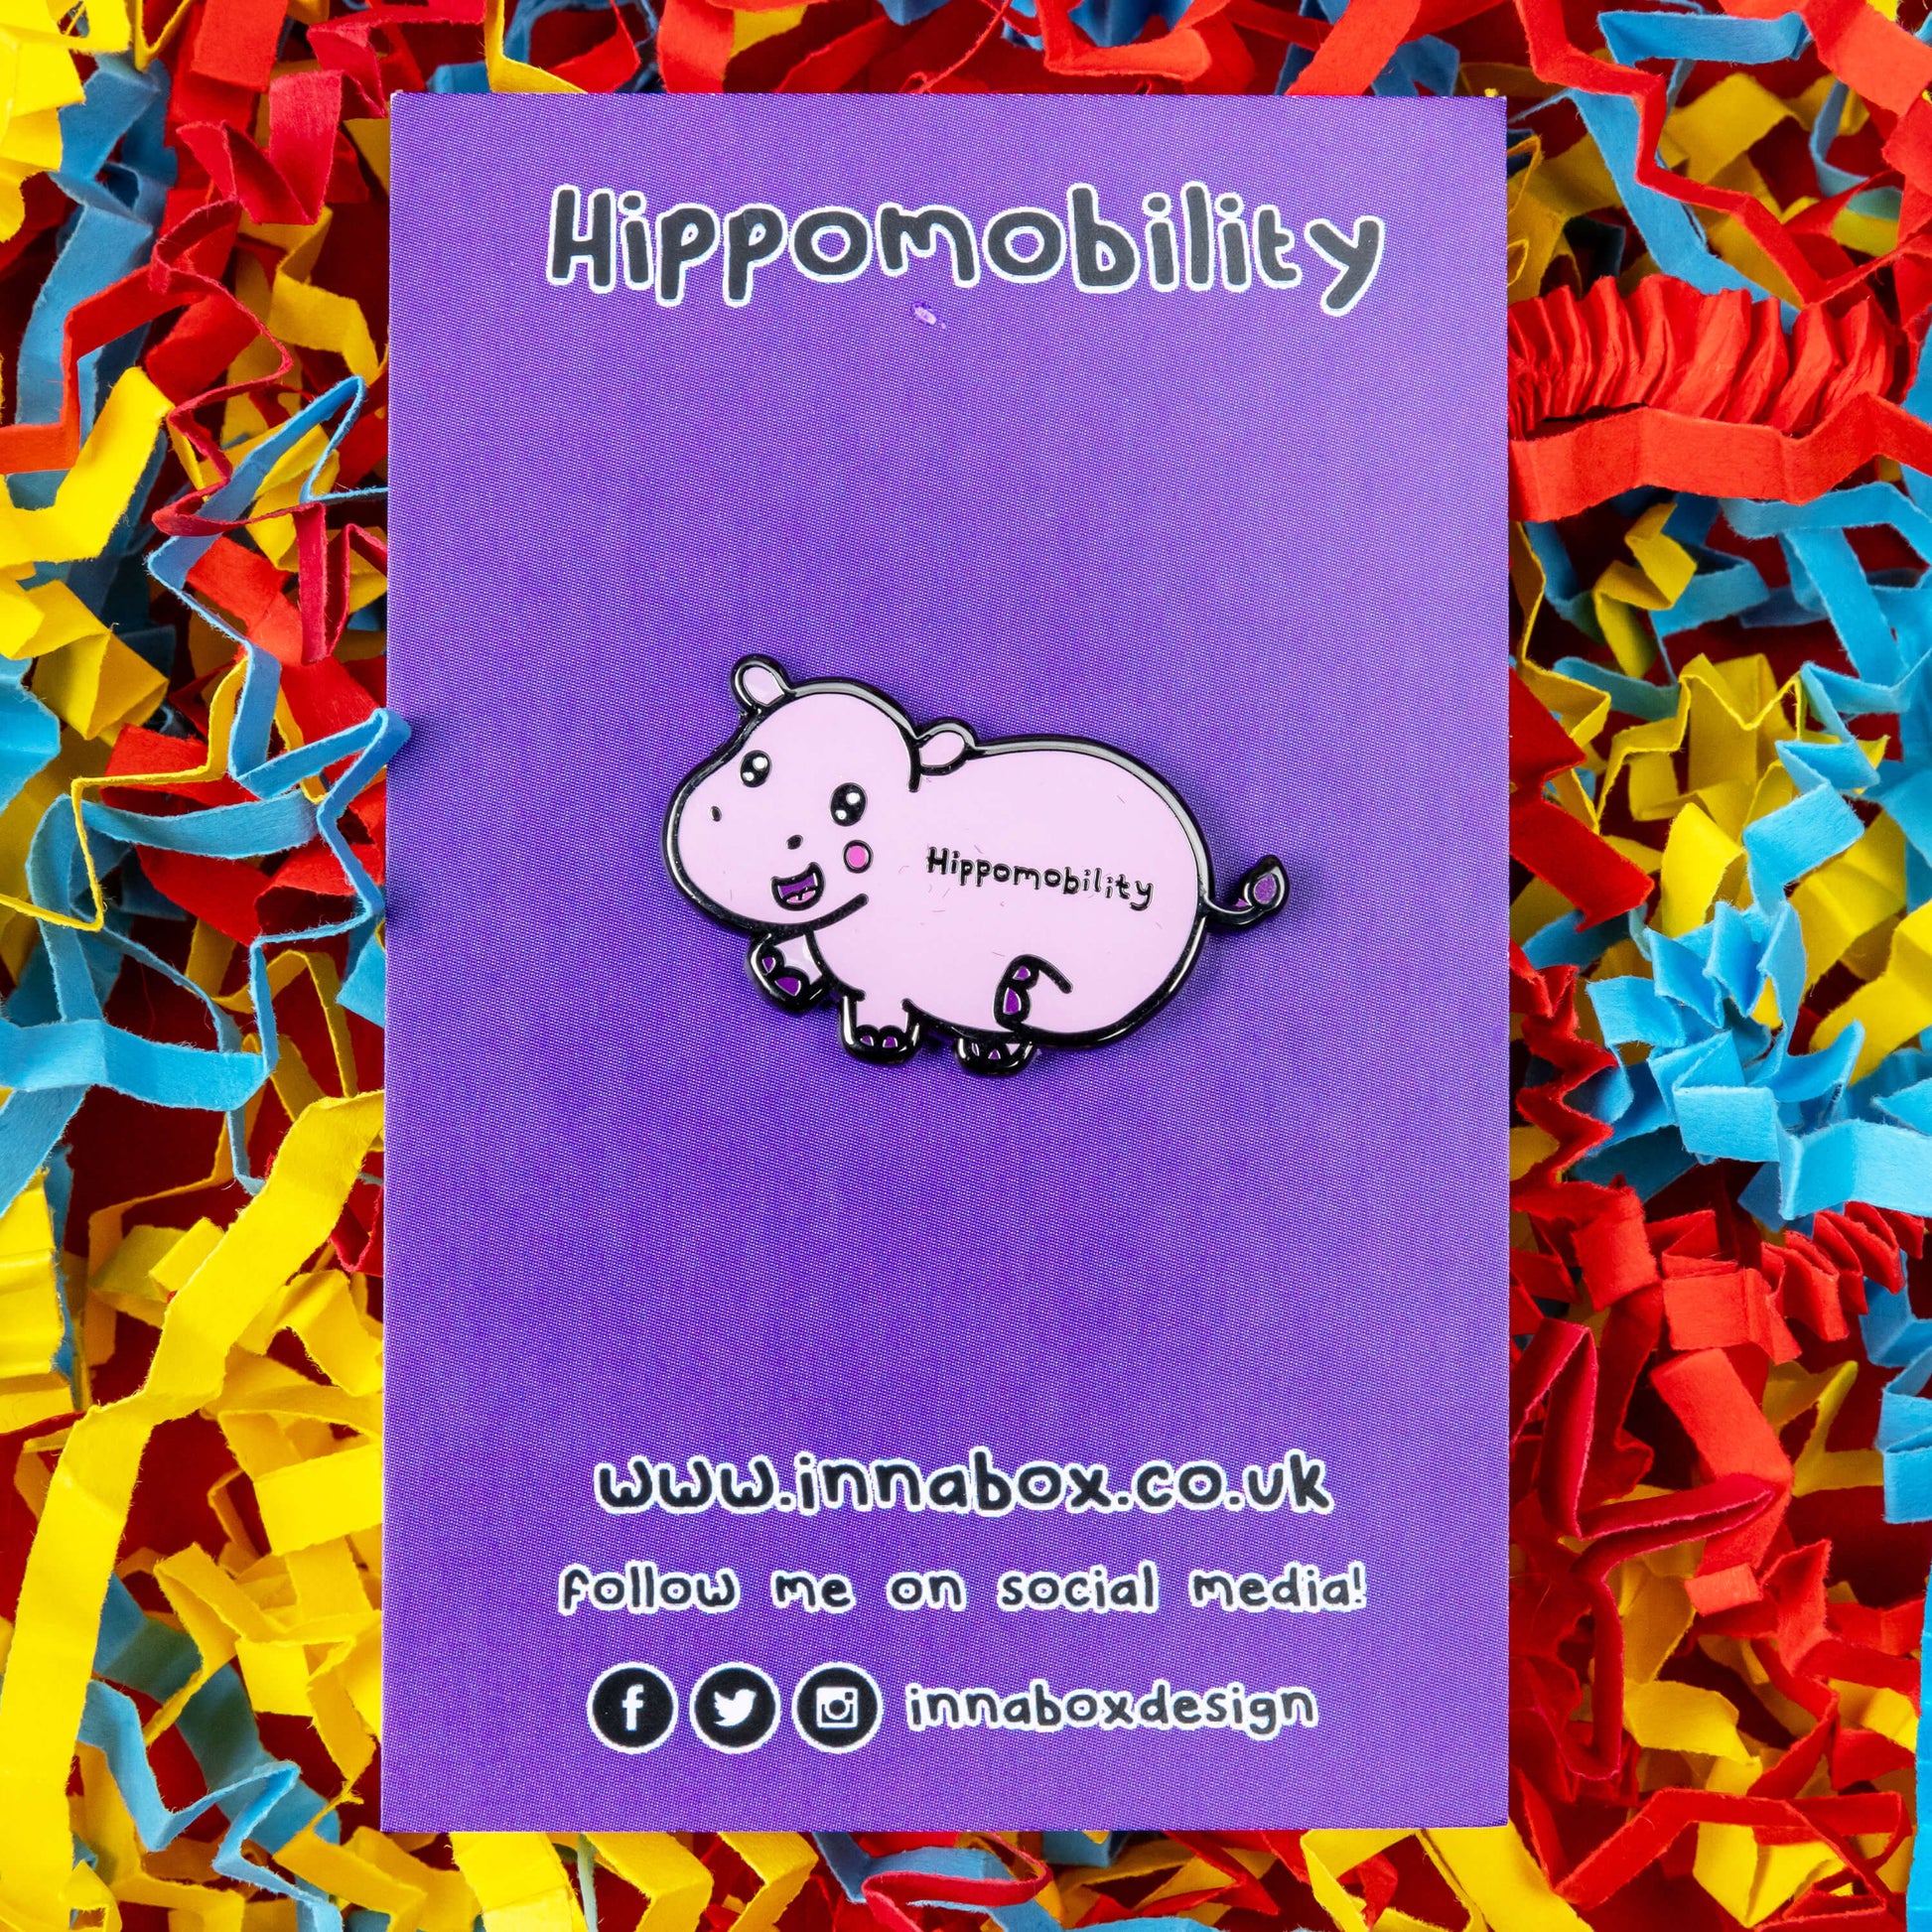 Hippmobility Enamel Pin - Hyper Mobility shown on purple backing card on a red, blue and yellow coloured card confetti background. The enamel pin is of a pink happy hippo with the text hippomobility written on its stomach. The enamel pin is designed to raise awareness for hyper mobility